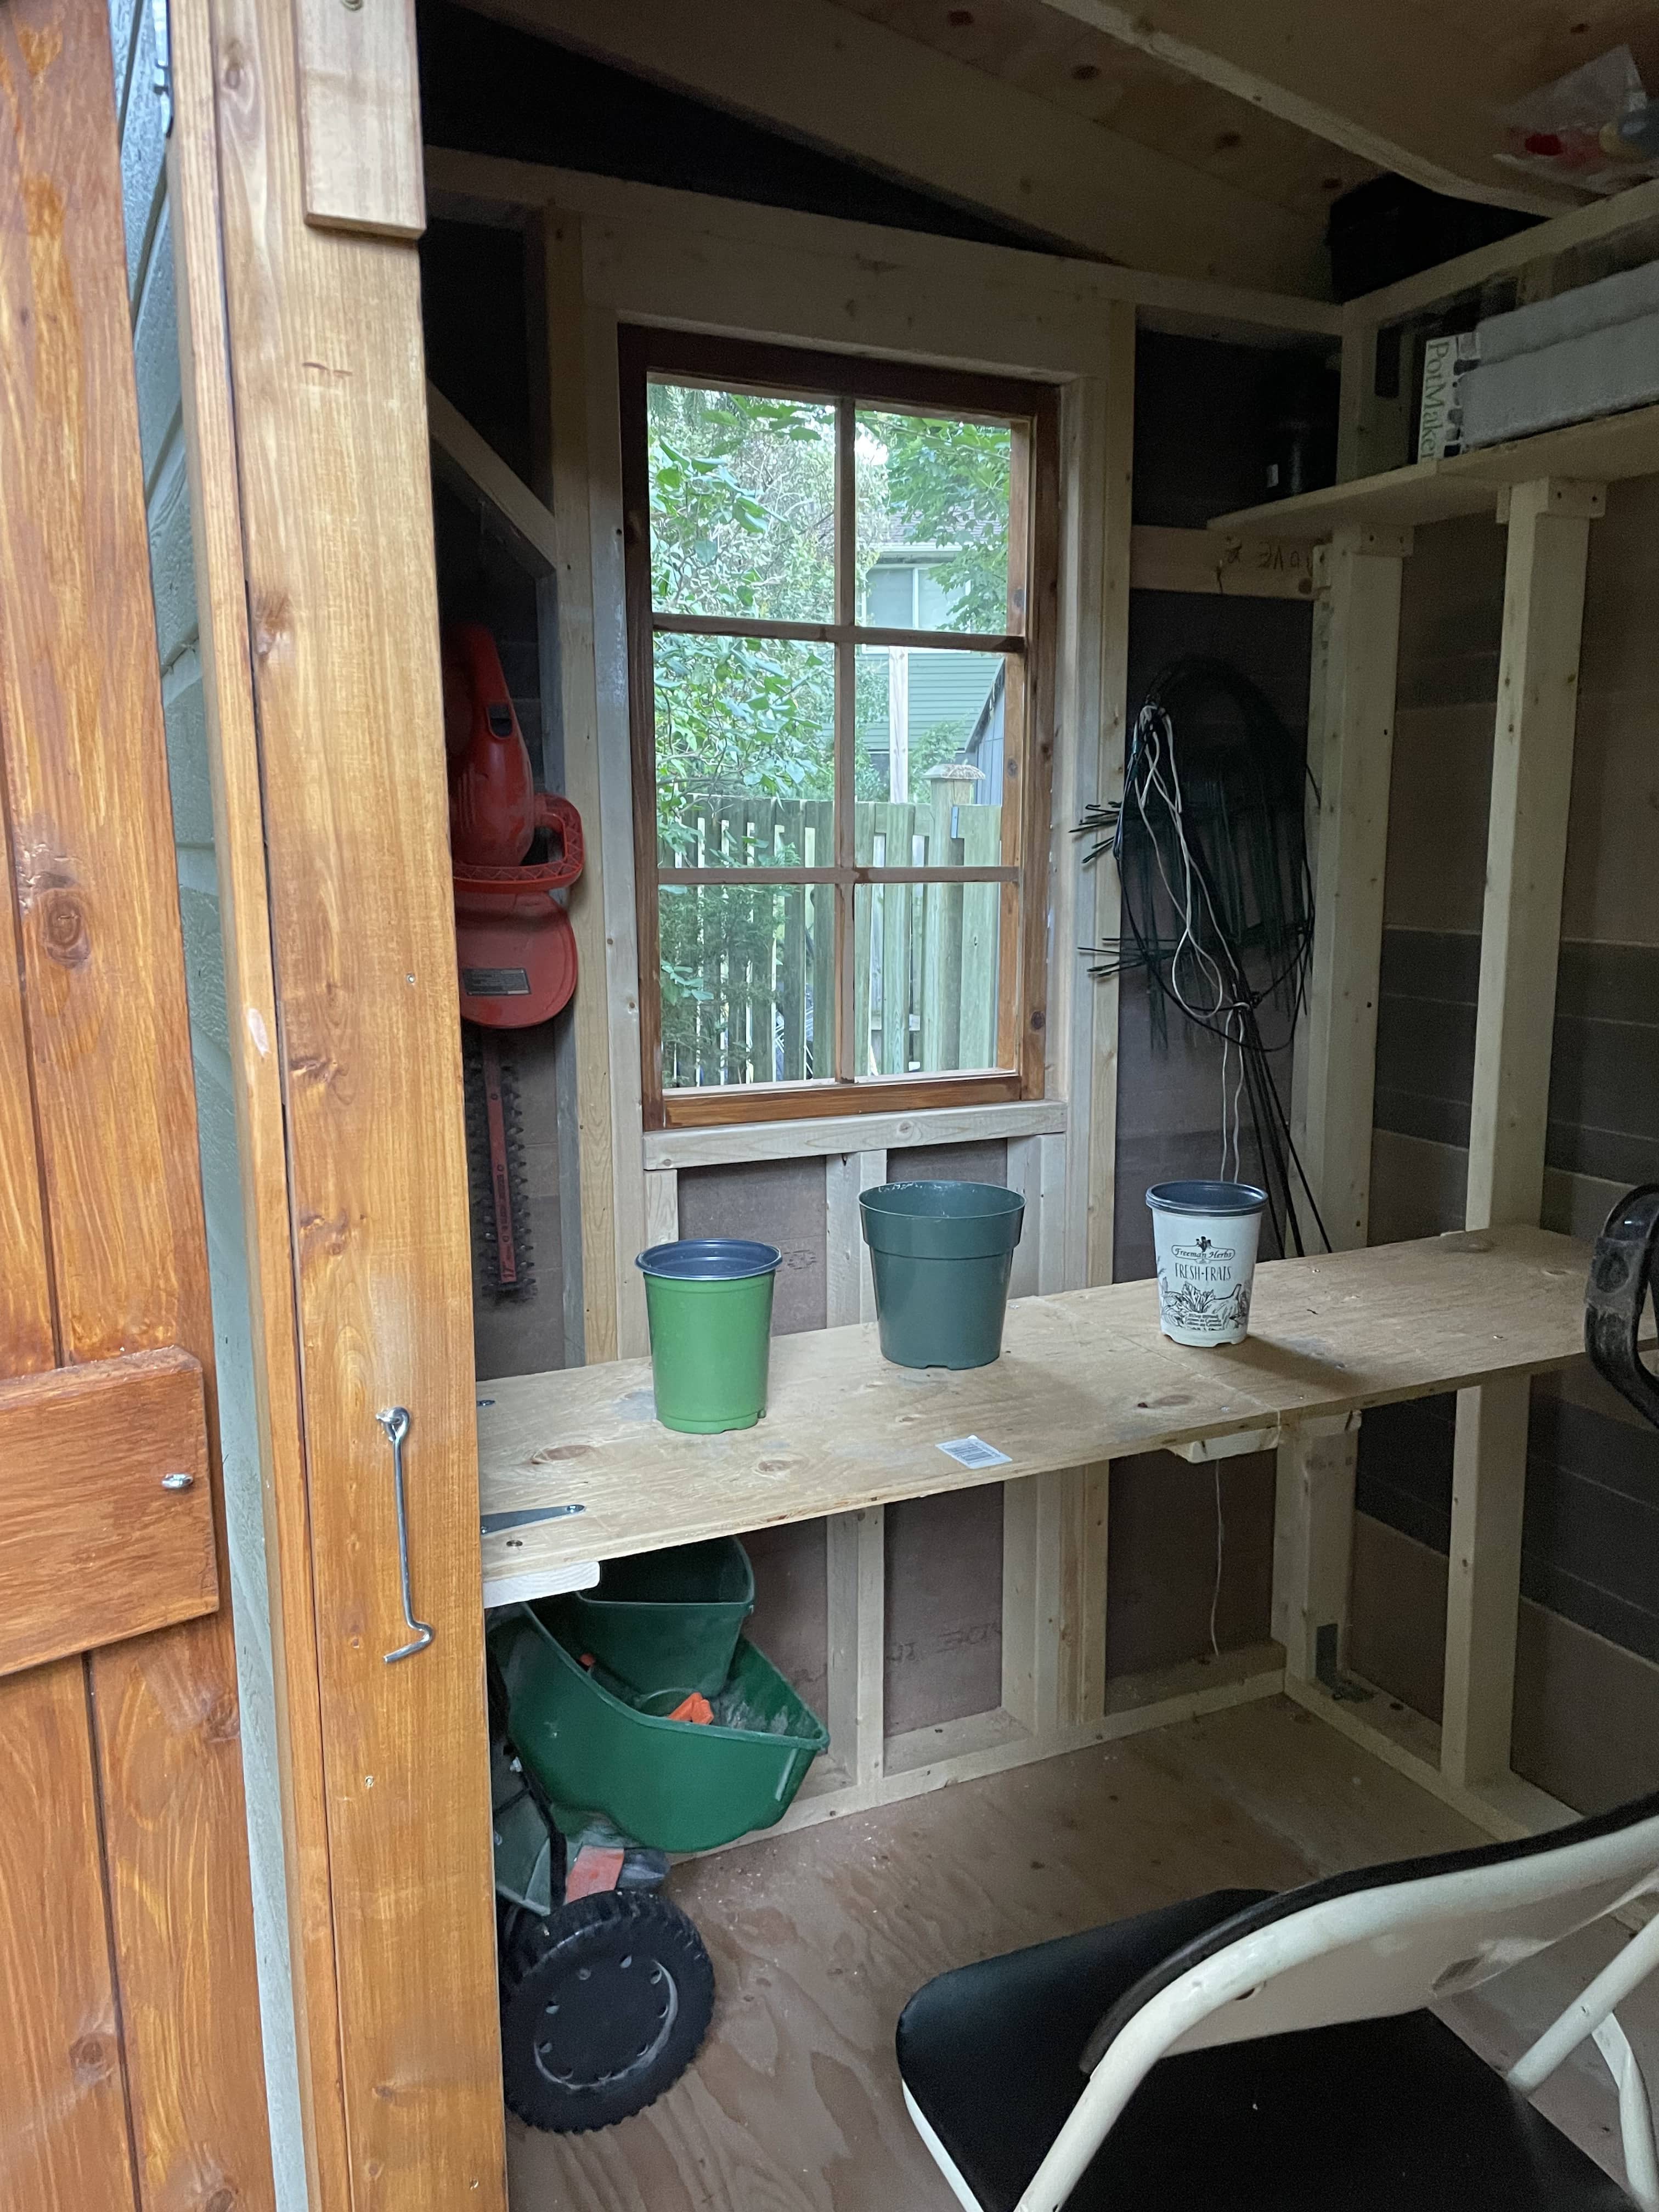 Interior view of 5' x 7' Sarawak Garden Shed located in Mississauga, Ontario – Summerwood Products